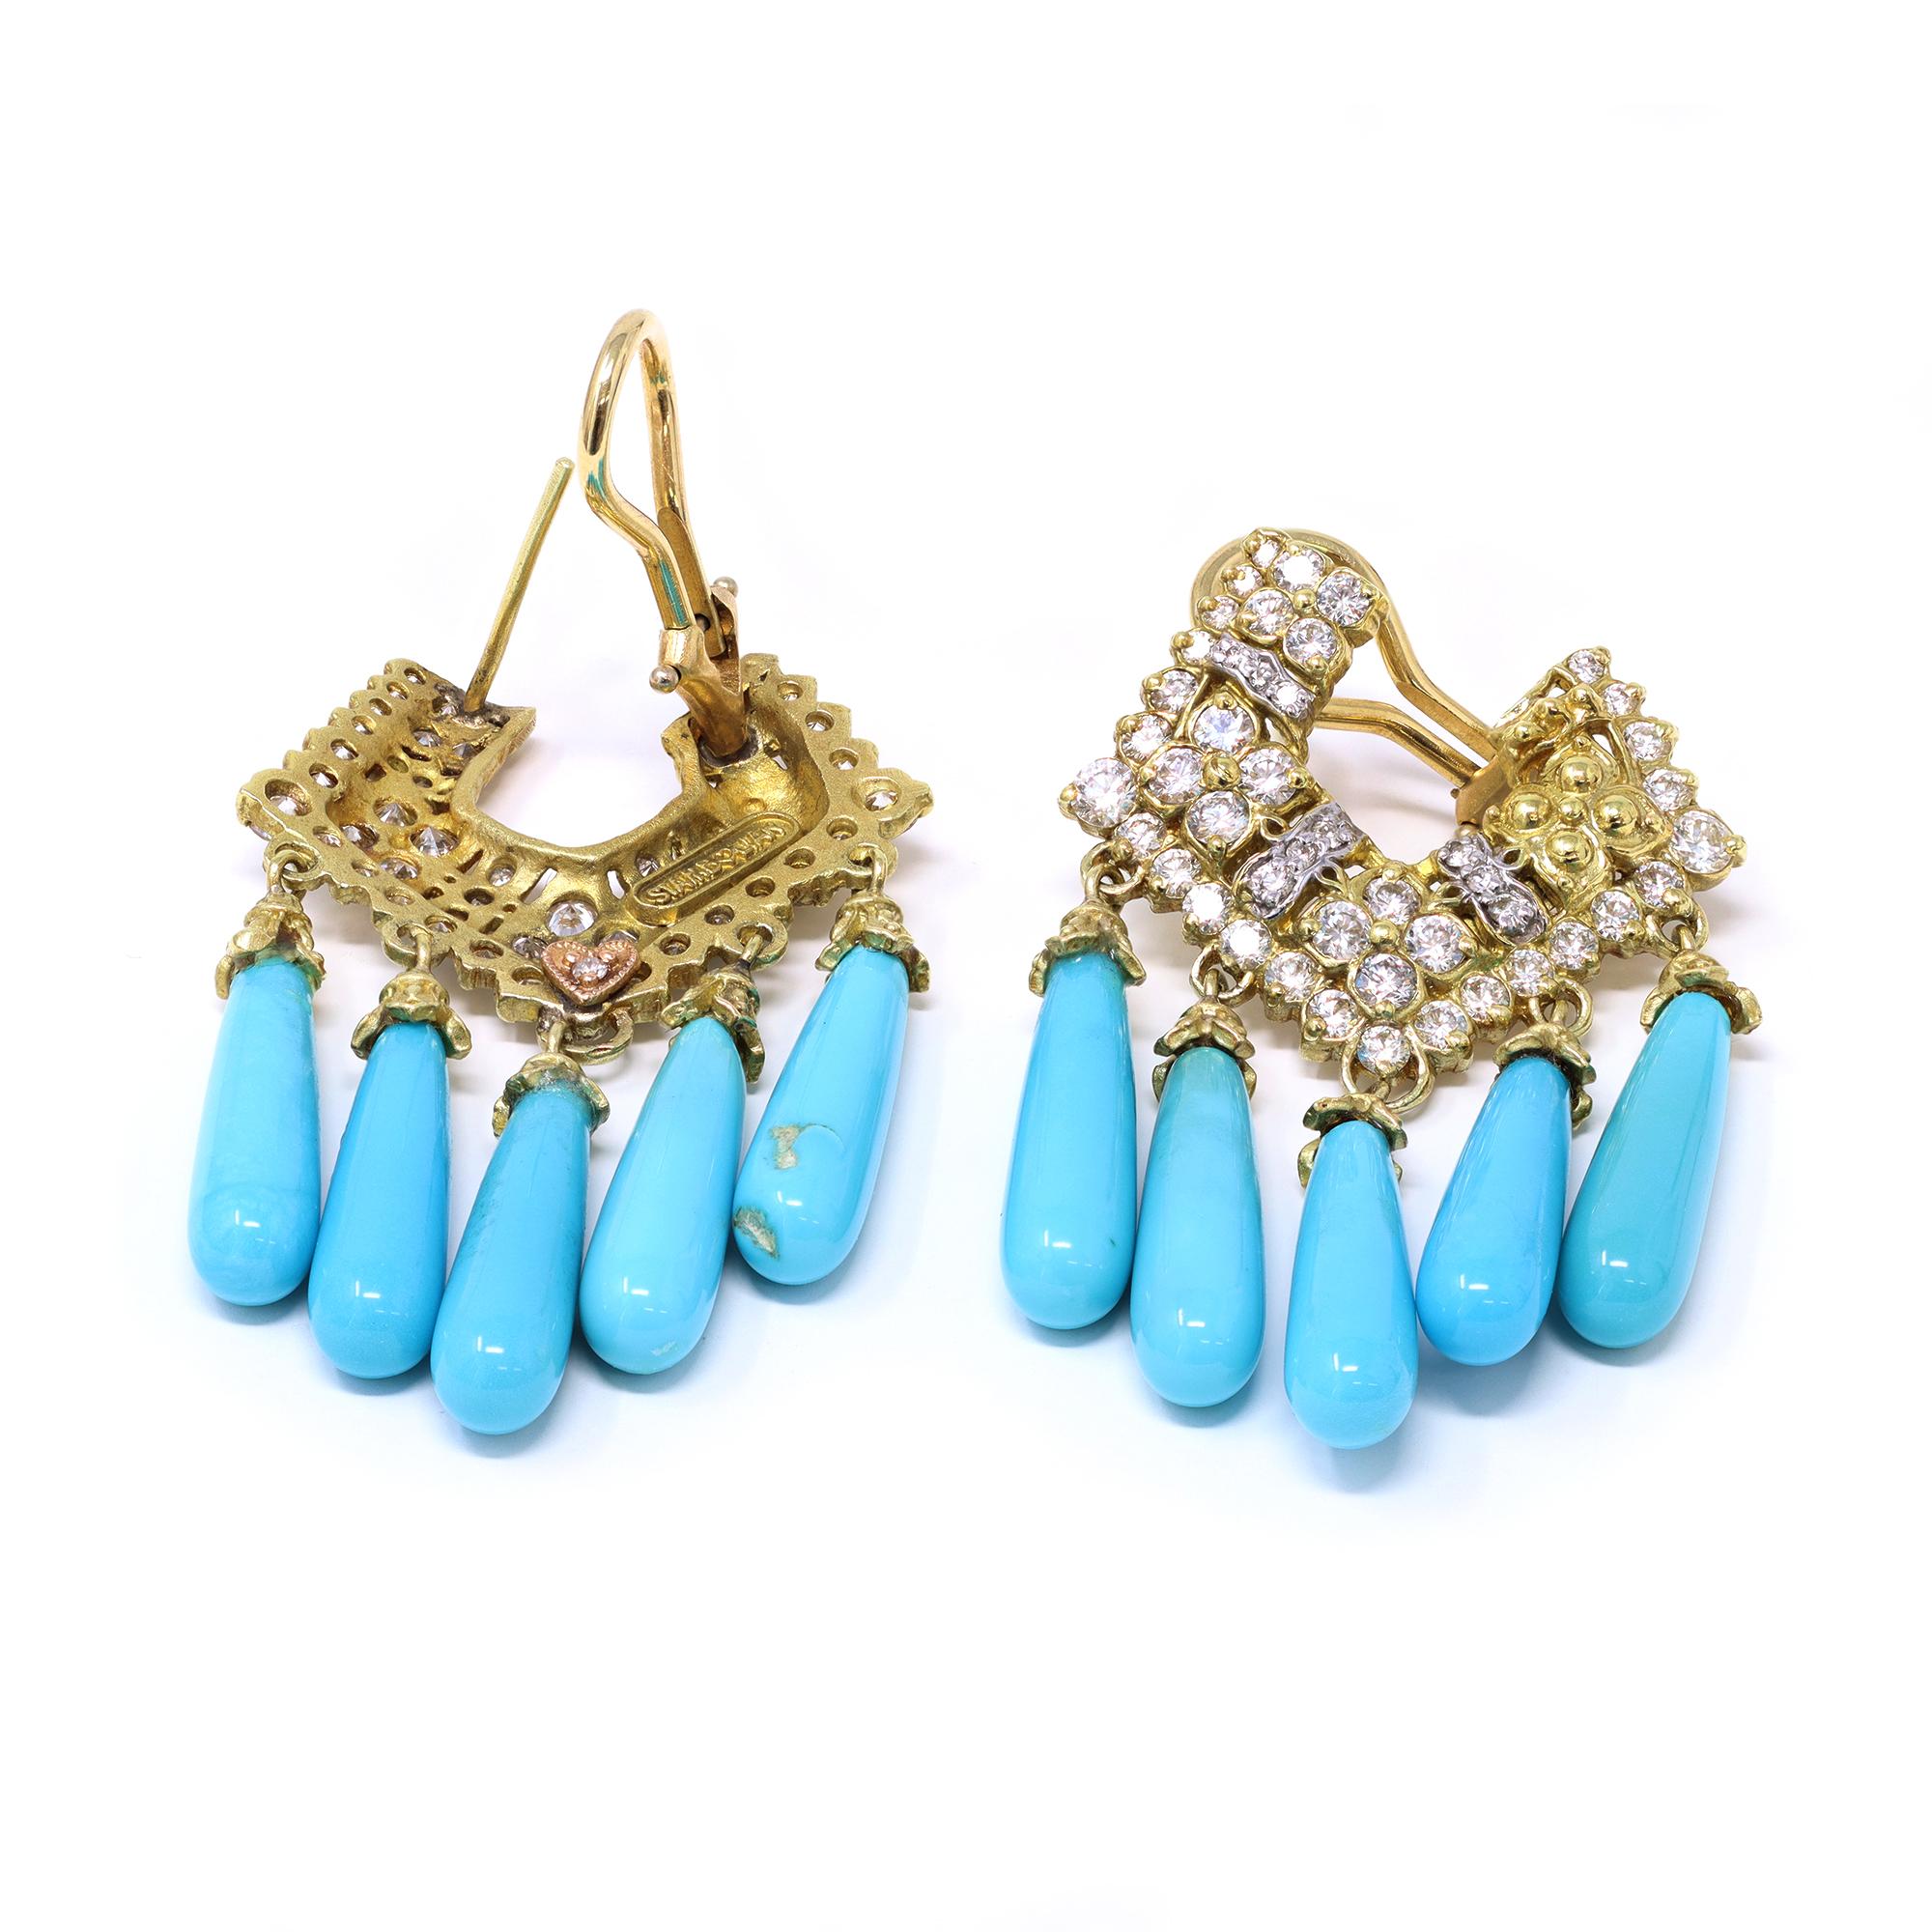 A pair of turquoise and diamond chandelier ear clips signed Stambolian. The chandelier earrings are skillfully executed in 18k yellow gold, American-made. The earrings have 1.60 carats of excellent diamonds estimated as GH color VS-SI clarity and